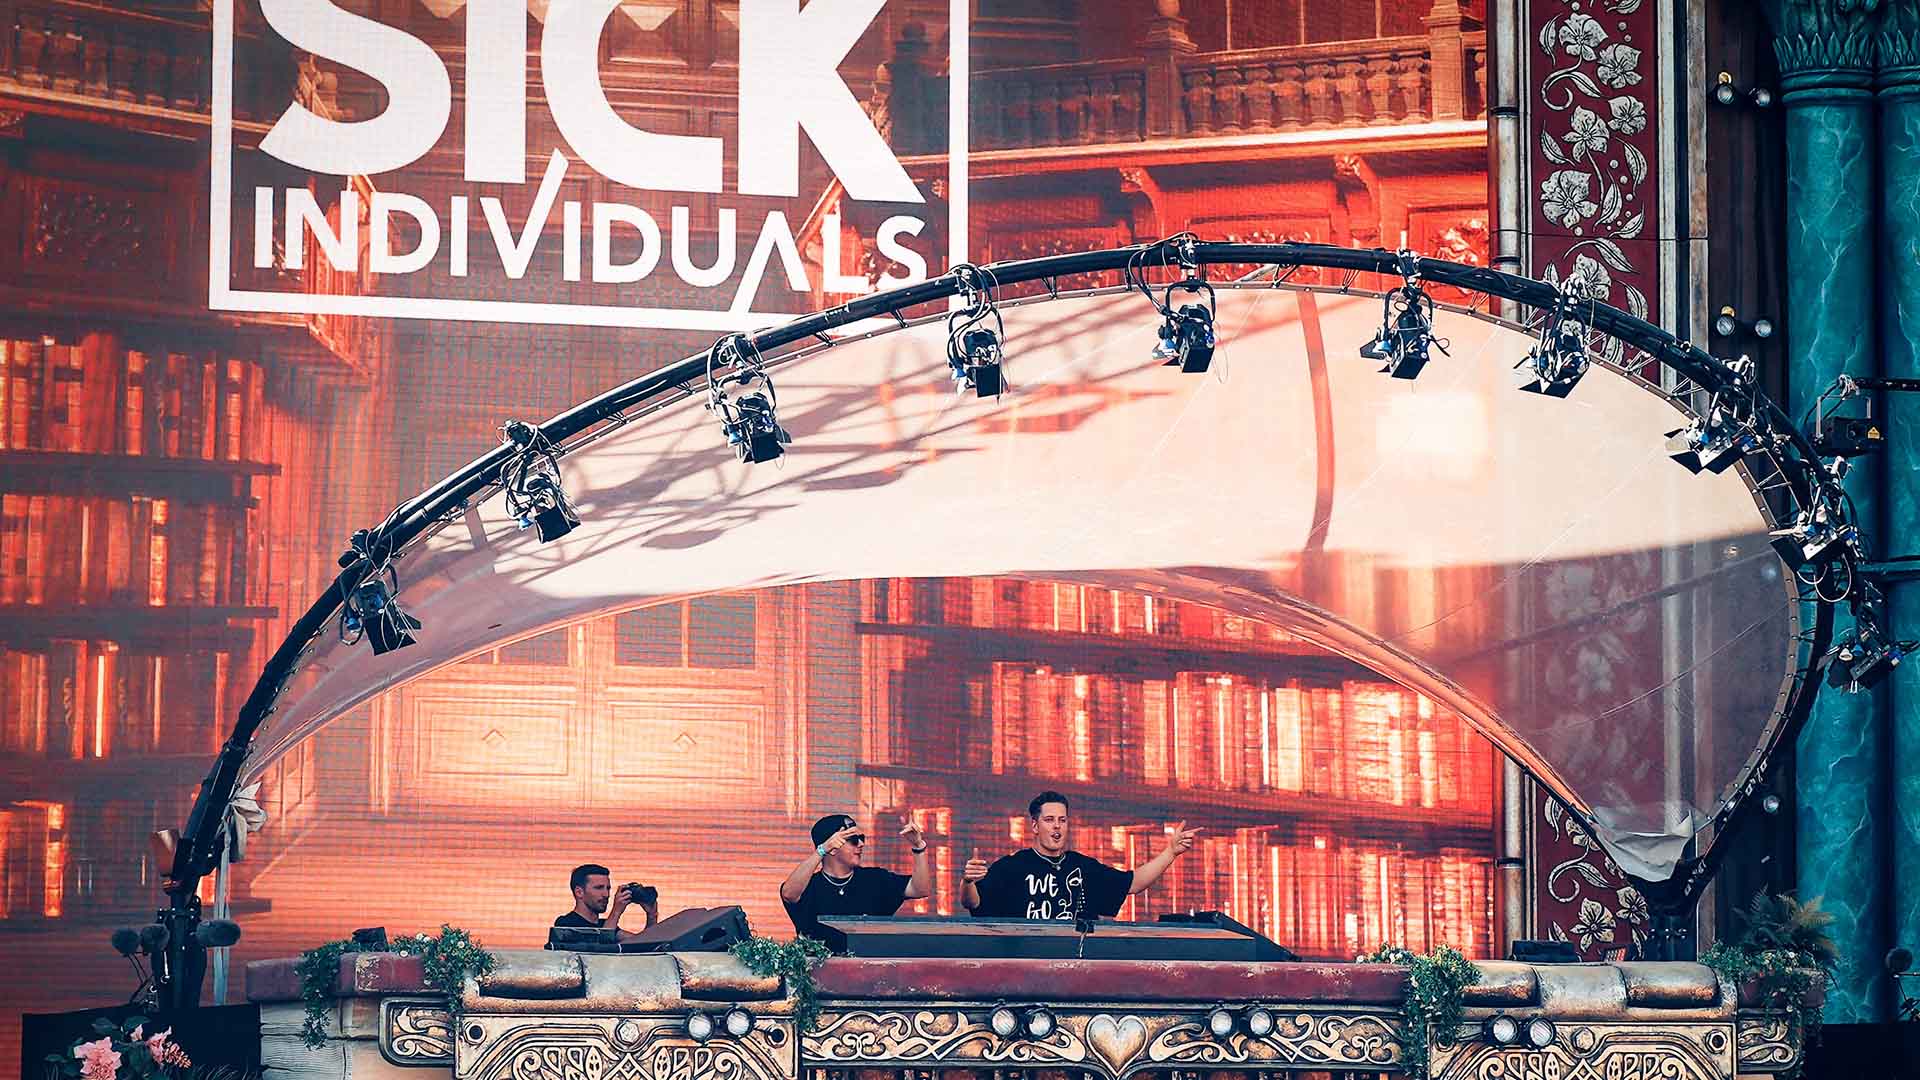 Sick Individuals are on tour with a month full of hot dates